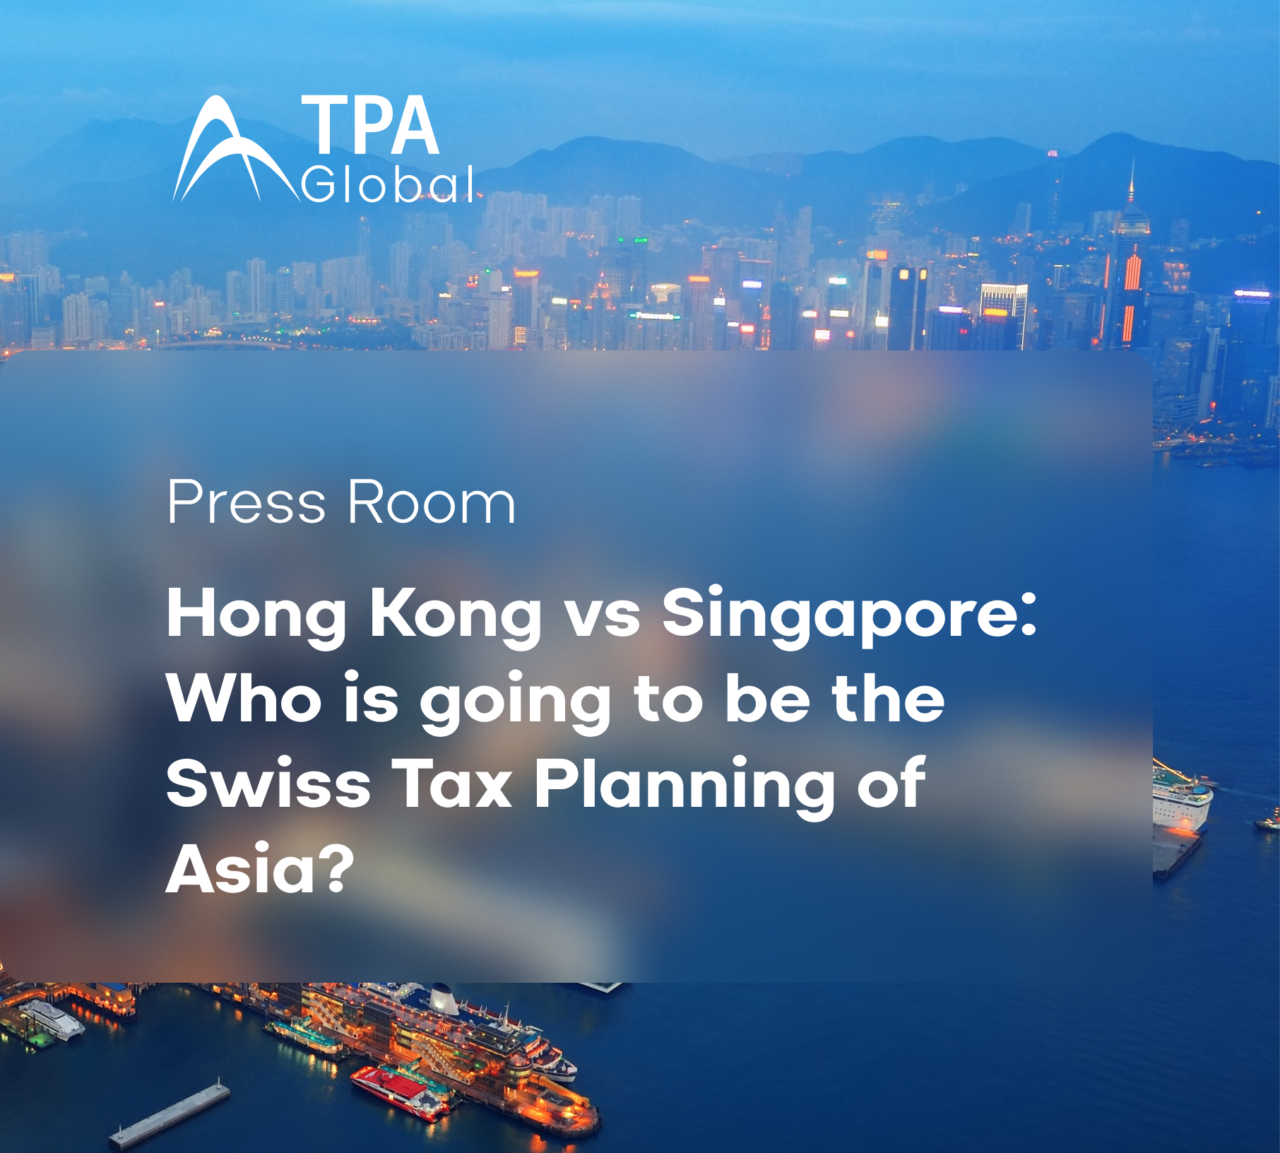 Hong Kong vs Singapore: Who is going to be the Swiss Tax Planning of Asia?